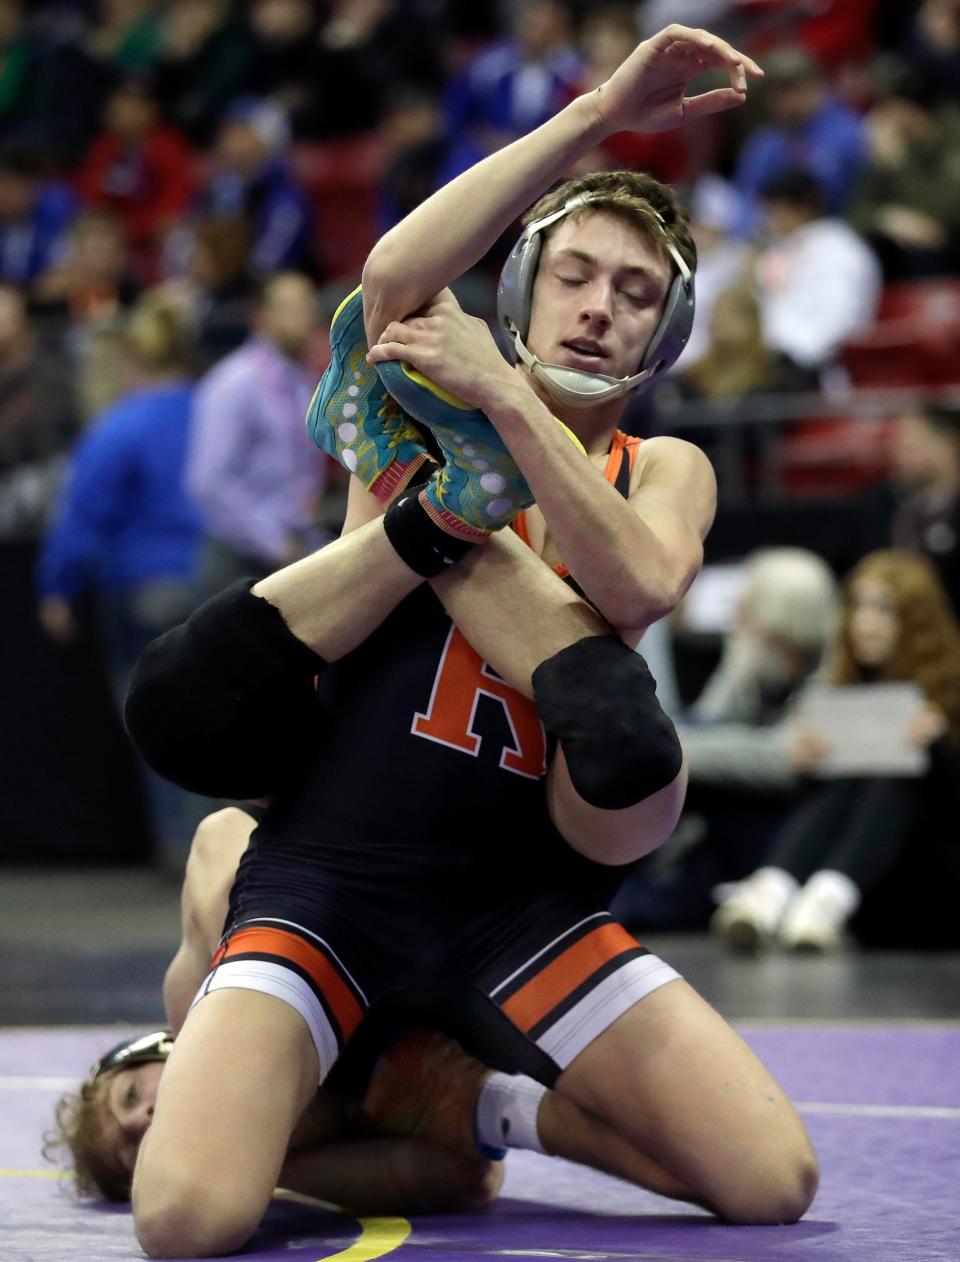 Mason Hoopman, who placed second at state last weekend at 145 pounds in Division 3, will help lead Cedar Grove-Belgium in its first appearance at team state since 1997.